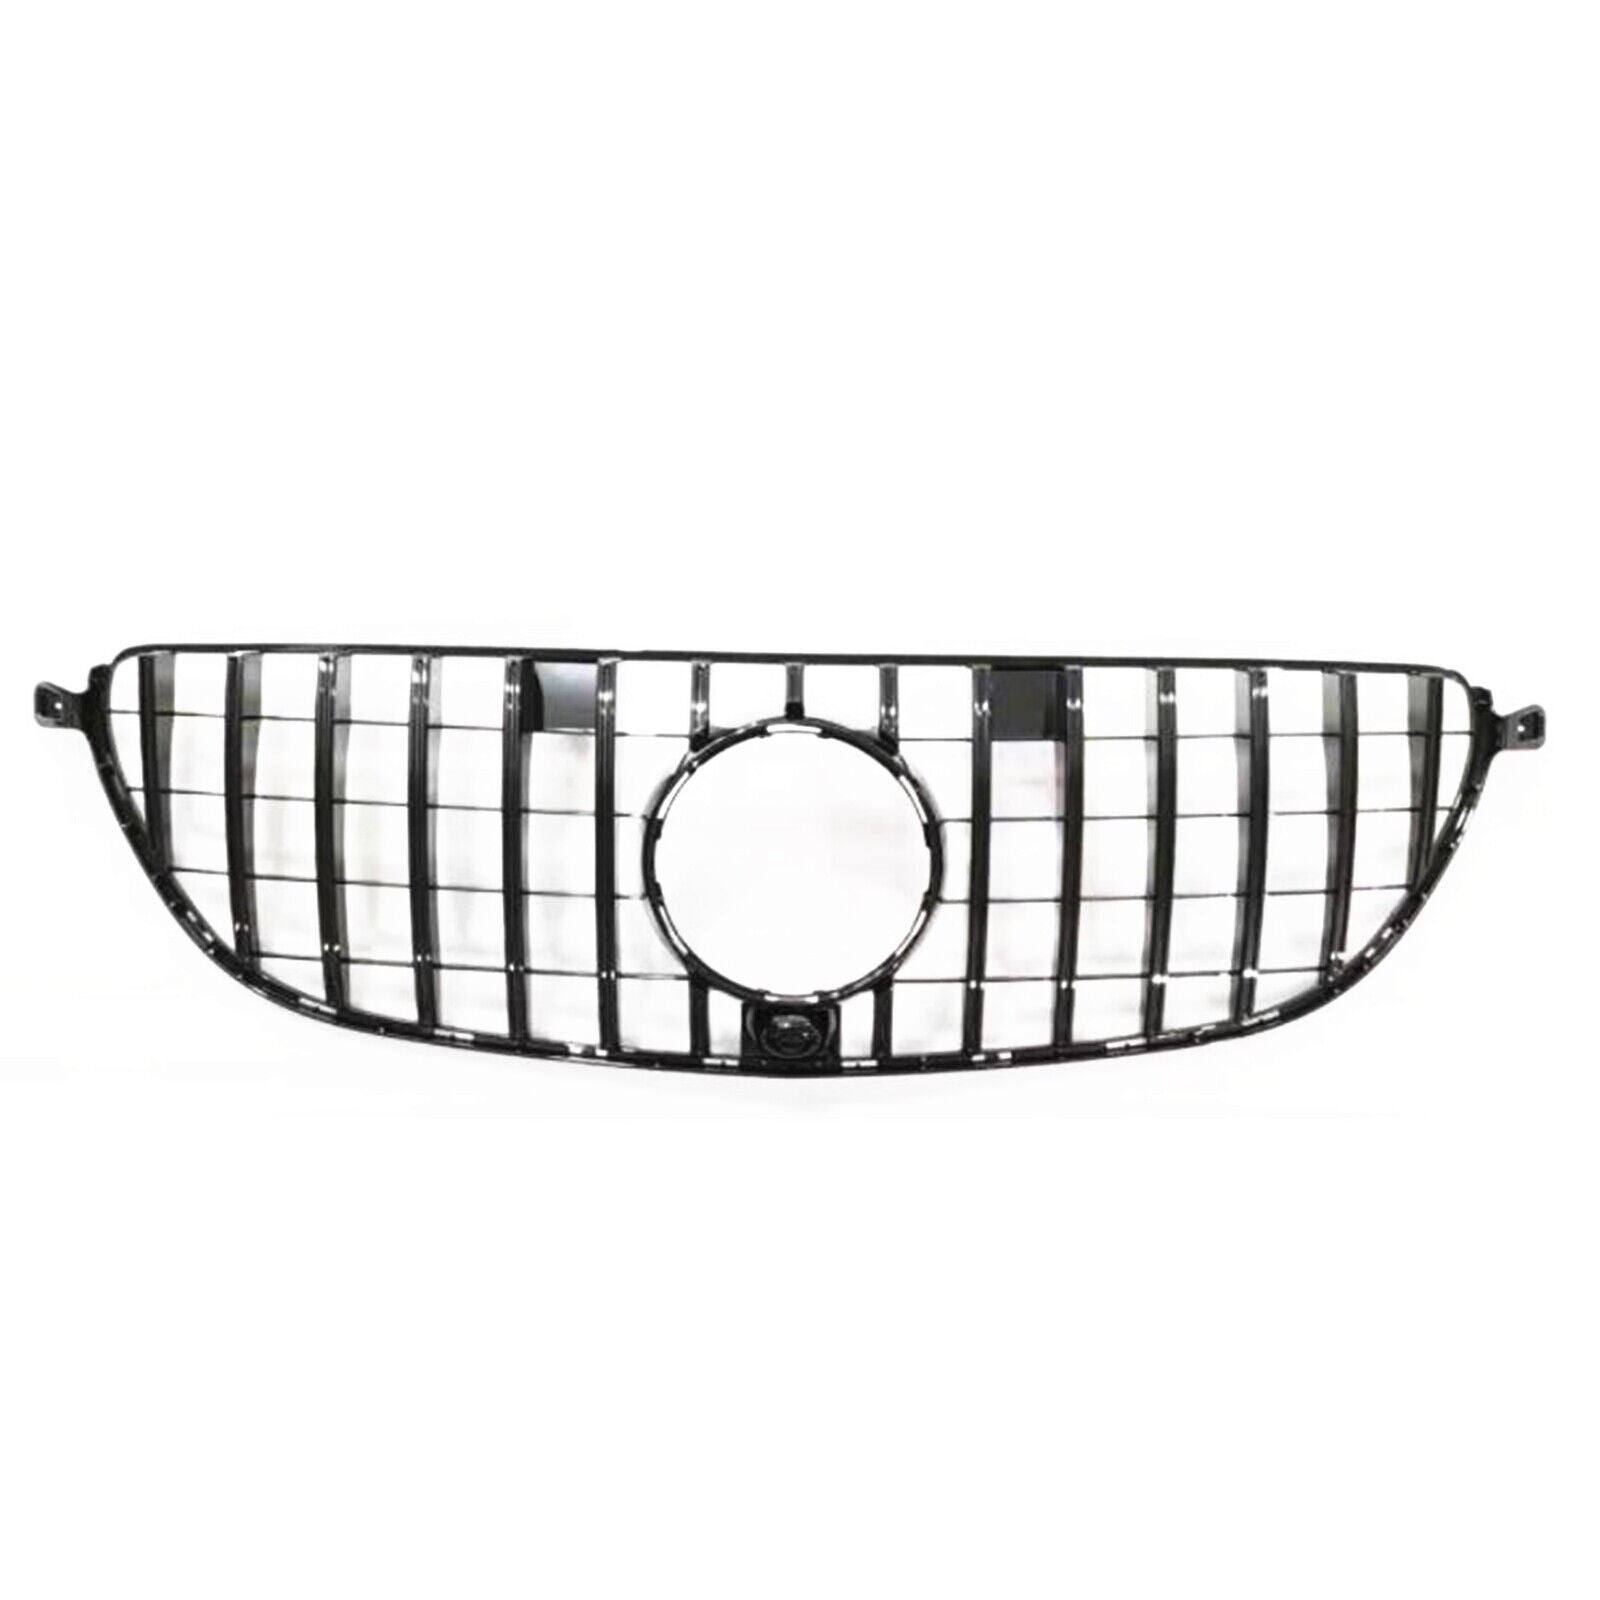 AMG Panamericana Front Grill to suit Mercedes Benz GLE W166 2015-2019